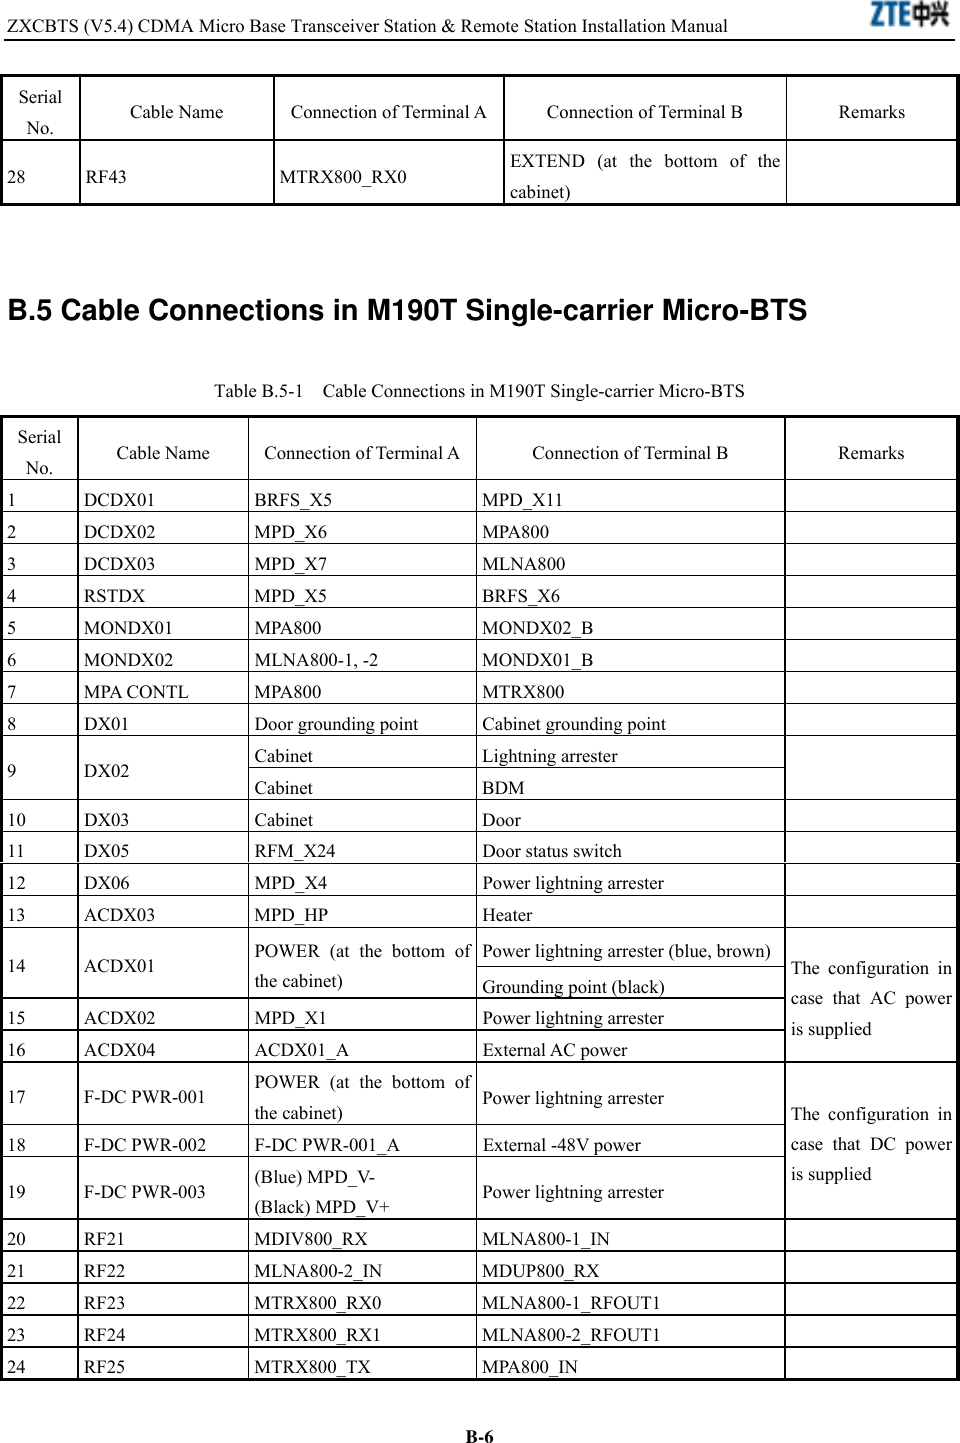 ZXCBTS (V5.4) CDMA Micro Base Transceiver Station &amp; Remote Station Installation Manual    B-6Serial No.  Cable Name  Connection of Terminal A Connection of Terminal B  Remarks 28 RF43  MTRX800_RX0  EXTEND (at the bottom of the cabinet)    B.5 Cable Connections in M190T Single-carrier Micro-BTS Table B.5-1    Cable Connections in M190T Single-carrier Micro-BTS Serial No.  Cable Name  Connection of Terminal A Connection of Terminal B  Remarks 1 DCDX01  BRFS_X5  MPD_X11   2 DCDX02  MPD_X6  MPA800   3 DCDX03  MPD_X7  MLNA800   4 RSTDX  MPD_X5  BRFS_X6   5 MONDX01  MPA800  MONDX02_B   6 MONDX02  MLNA800-1, -2  MONDX01_B   7 MPA CONTL MPA800  MTRX800   8  DX01  Door grounding point  Cabinet grounding point   Cabinet Lightning arrester  9 DX02  Cabinet BDM   10 DX03  Cabinet  Door   11  DX05  RFM_X24  Door status switch   12  DX06  MPD_X4  Power lightning arrester   13 ACDX03  MPD_HP  Heater   Power lightning arrester (blue, brown) 14 ACDX01  POWER (at the bottom of the cabinet)  Grounding point (black) 15  ACDX02  MPD_X1  Power lightning arrester 16 ACDX04  ACDX01_A  External AC power The configuration in case that AC power is supplied 17 F-DC PWR-001 POWER (at the bottom of the cabinet)  Power lightning arrester 18  F-DC PWR-002  F-DC PWR-001_A  External -48V power 19 F-DC PWR-003 (Blue) MPD_V- (Black) MPD_V+  Power lightning arrester The configuration in case that DC power is supplied 20 RF21  MDIV800_RX  MLNA800-1_IN   21 RF22  MLNA800-2_IN  MDUP800_RX   22 RF23  MTRX800_RX0  MLNA800-1_RFOUT1   23 RF24  MTRX800_RX1  MLNA800-2_RFOUT1   24 RF25  MTRX800_TX  MPA800_IN   